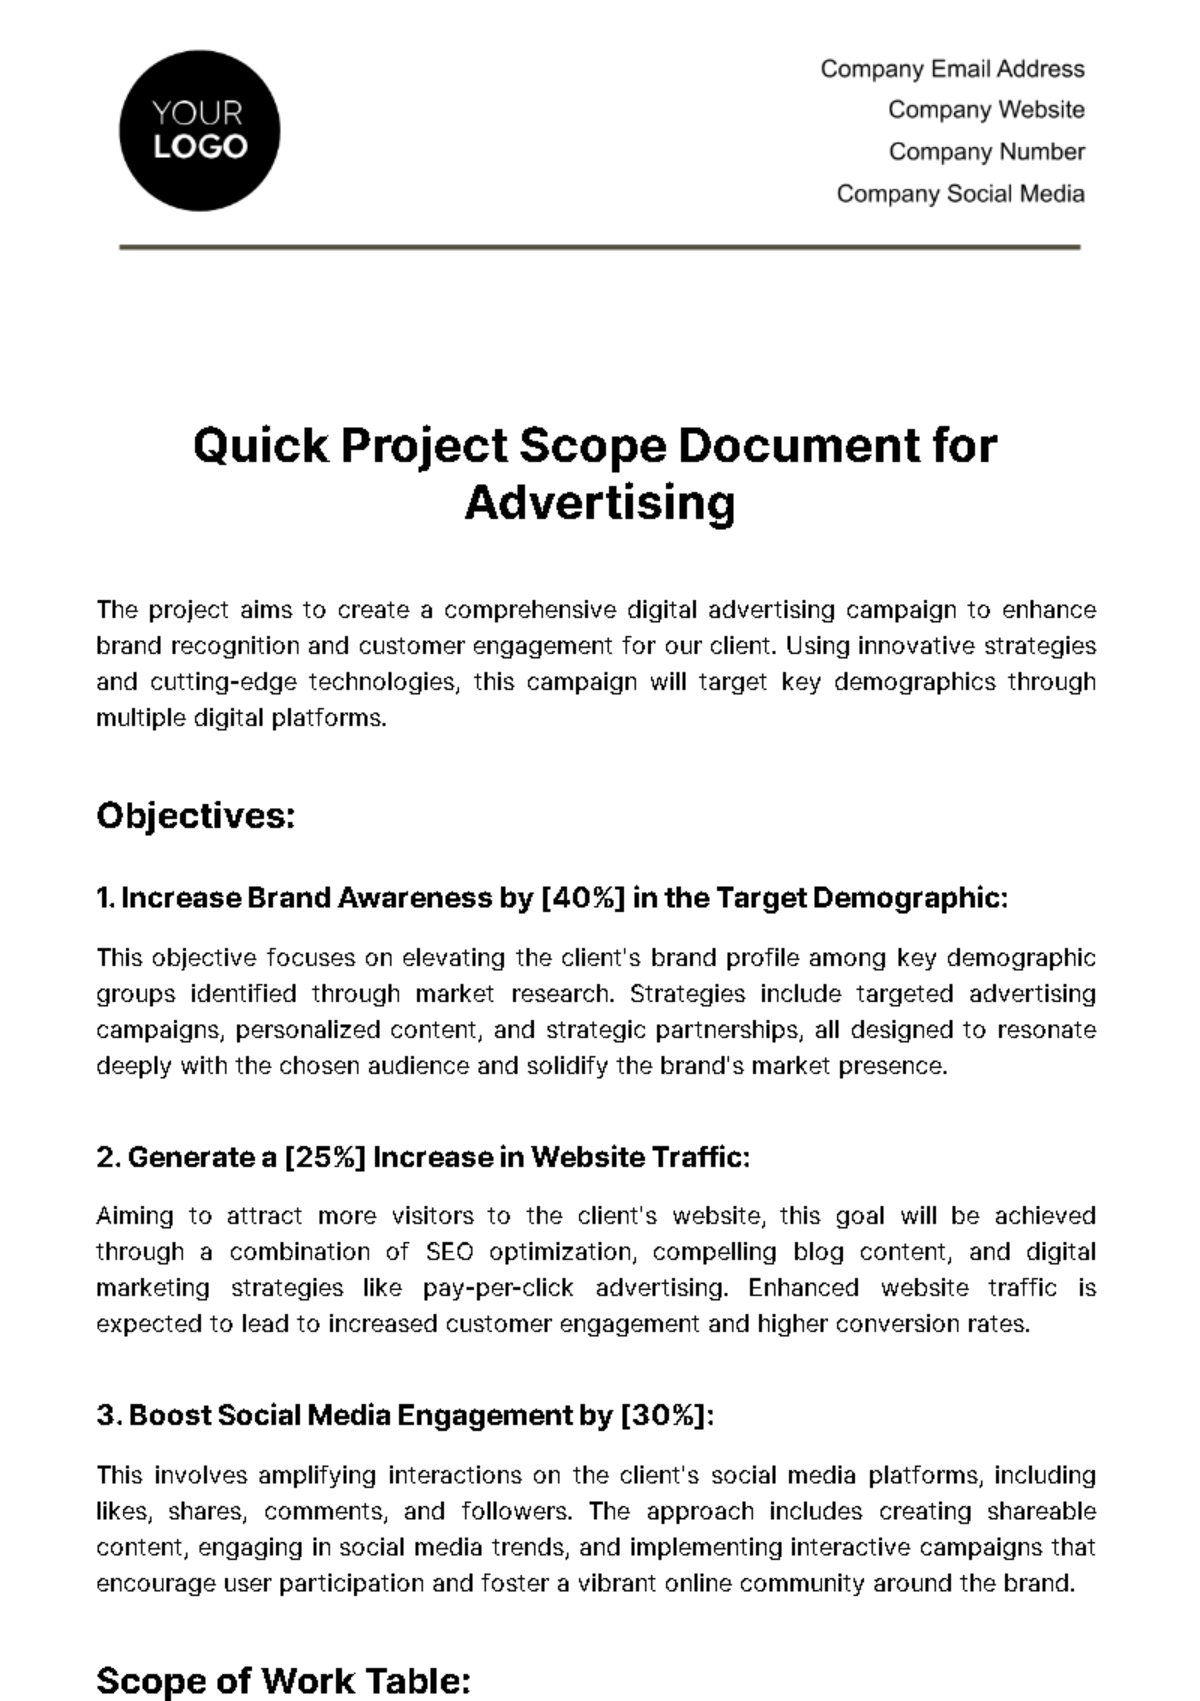 Free Quick Project Scope Document for Advertising Template